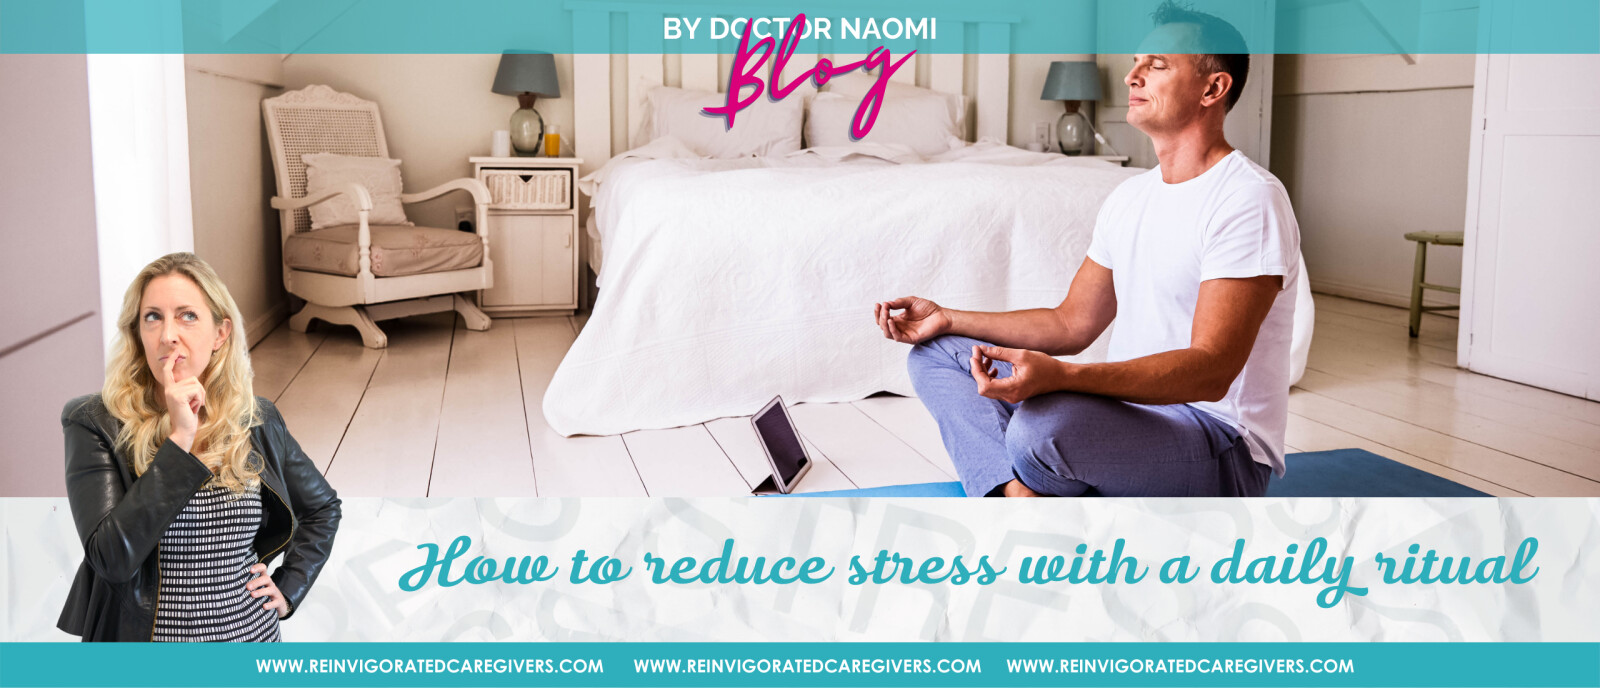 How to reduce stress with a daily ritual